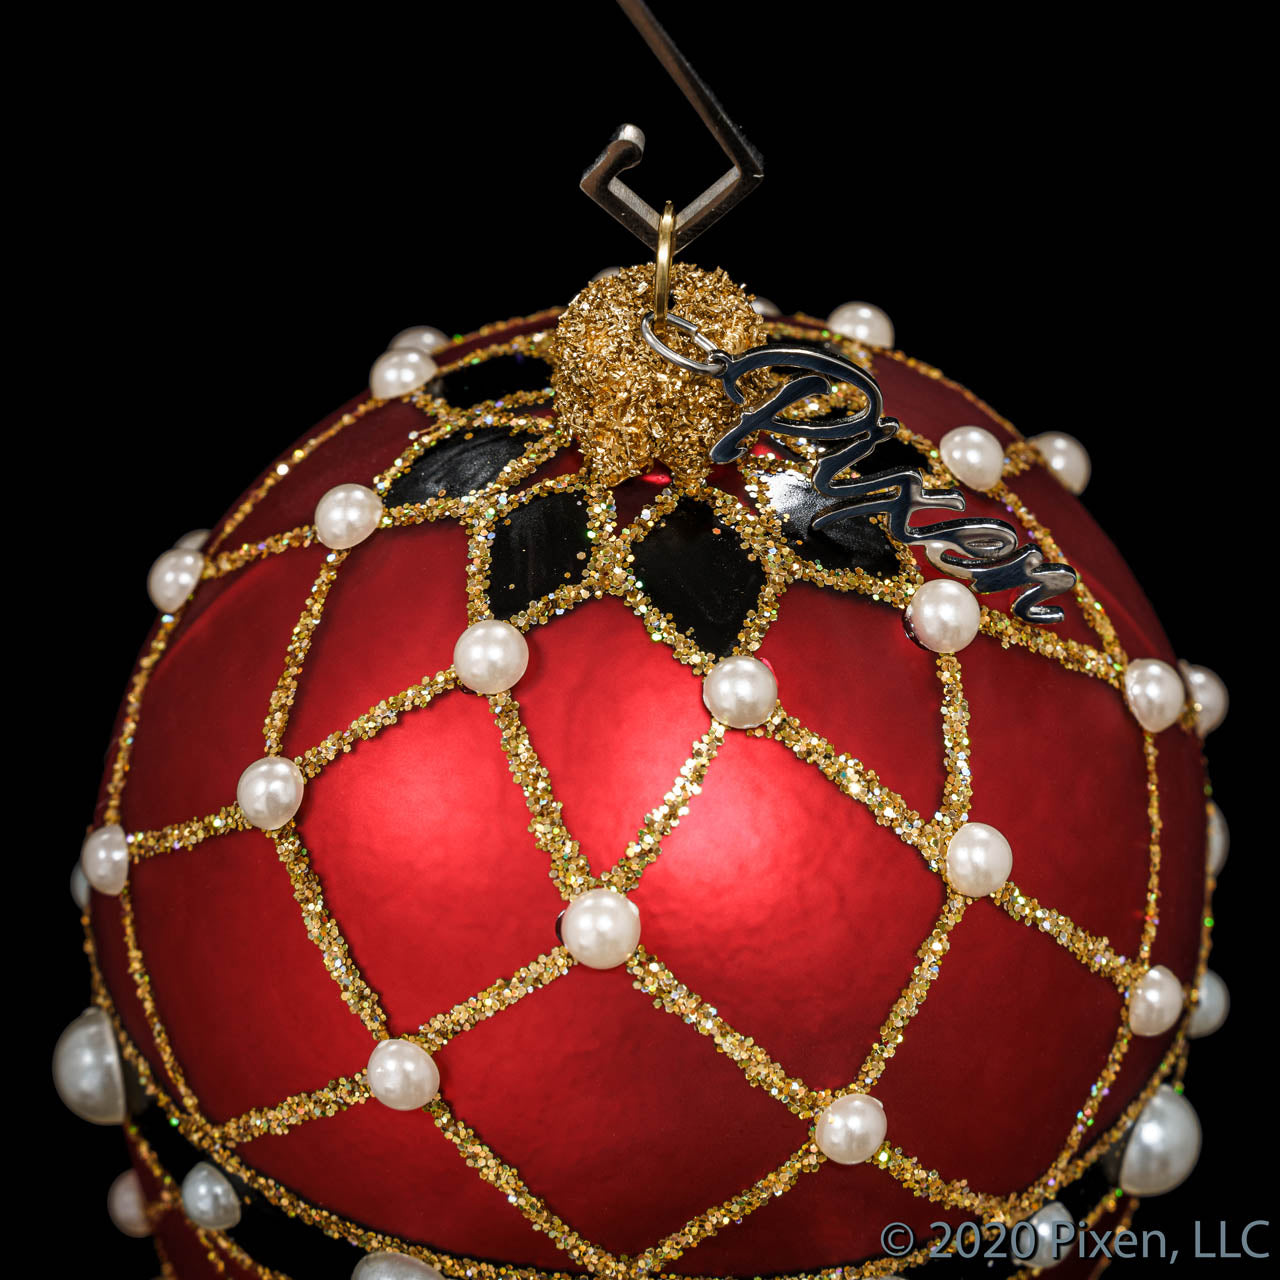 Reverie Faberge Egg Christmas Ornament in Red by Pixen